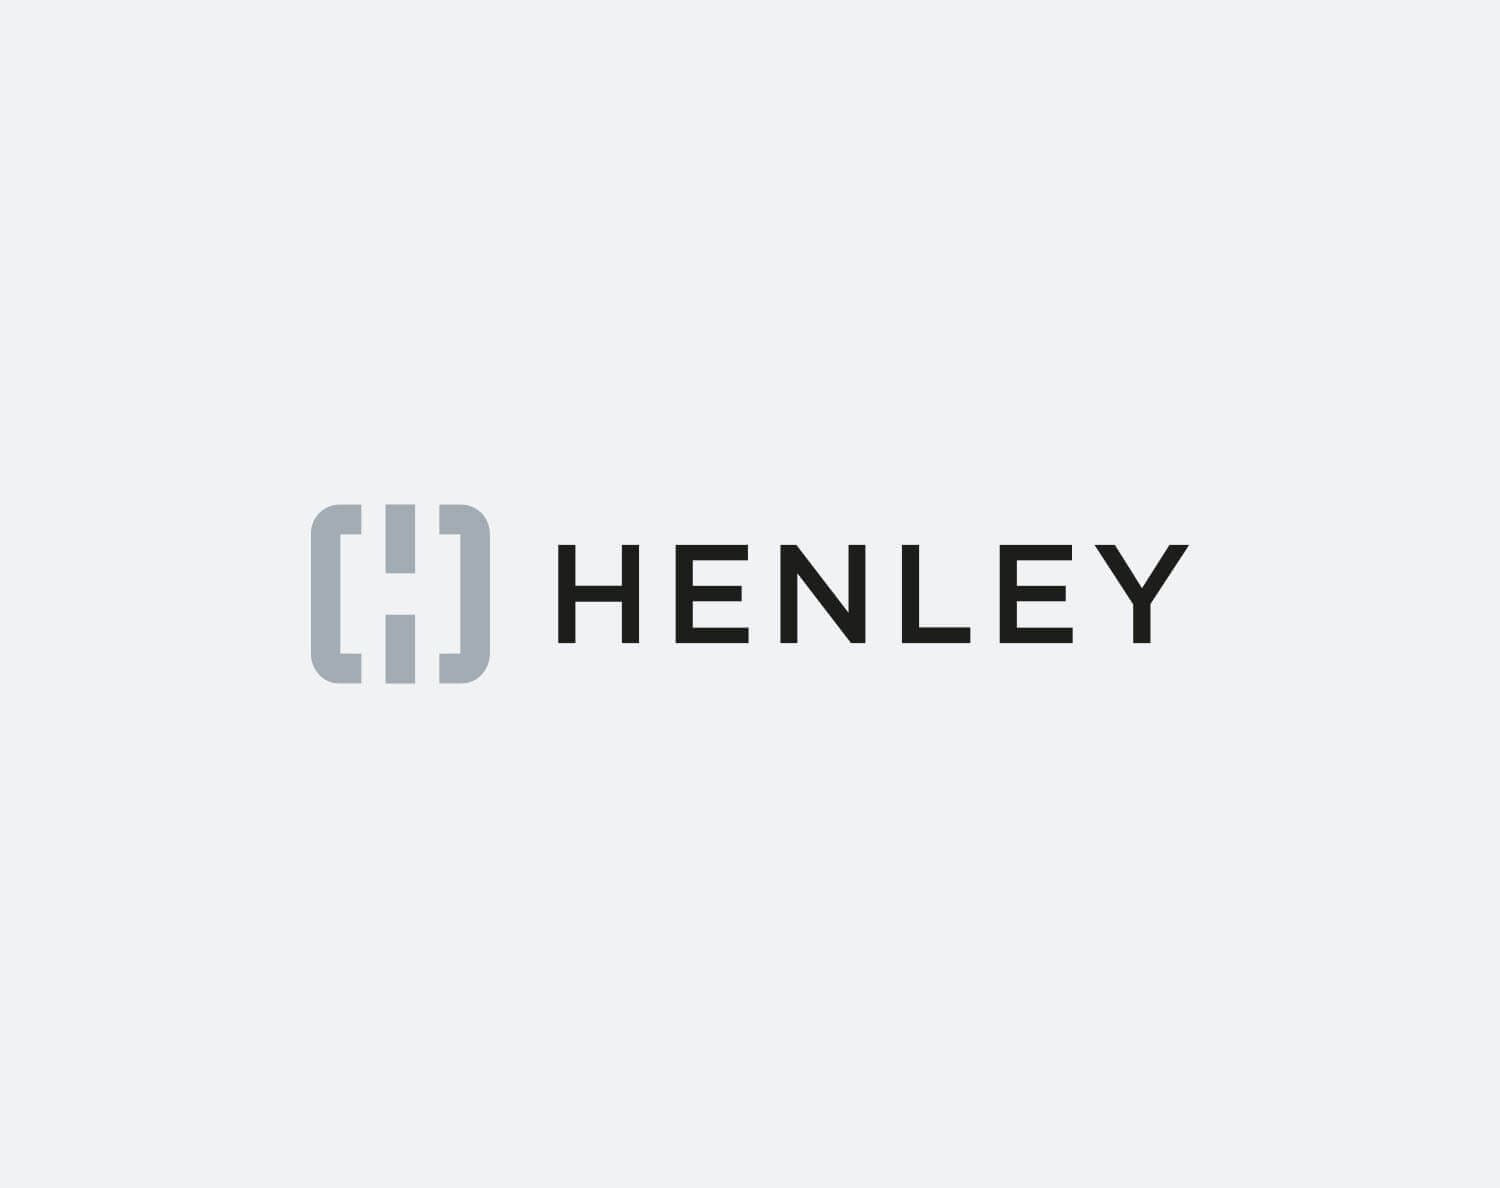 New logo design for Private Equity Real Estate Investor & Fund Manager - Henley Investments